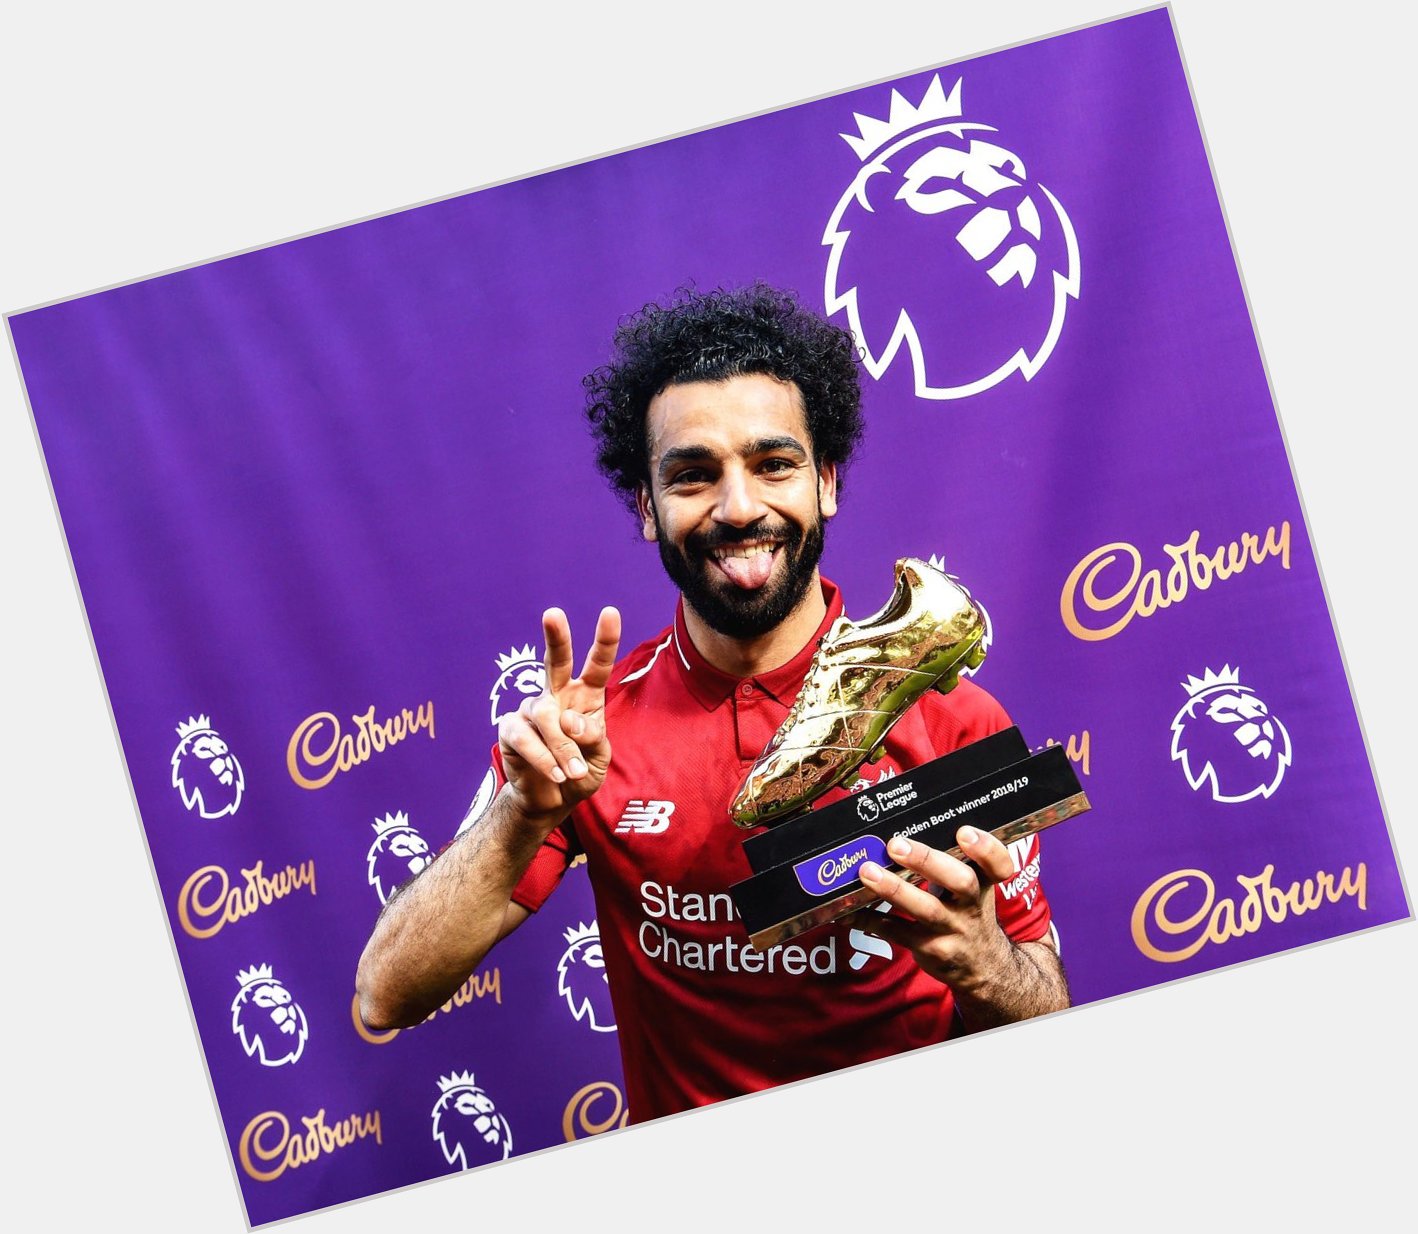 Happy 27th birthday to Mohamed Salah! 

Forever blessed that he s playing for my team.   